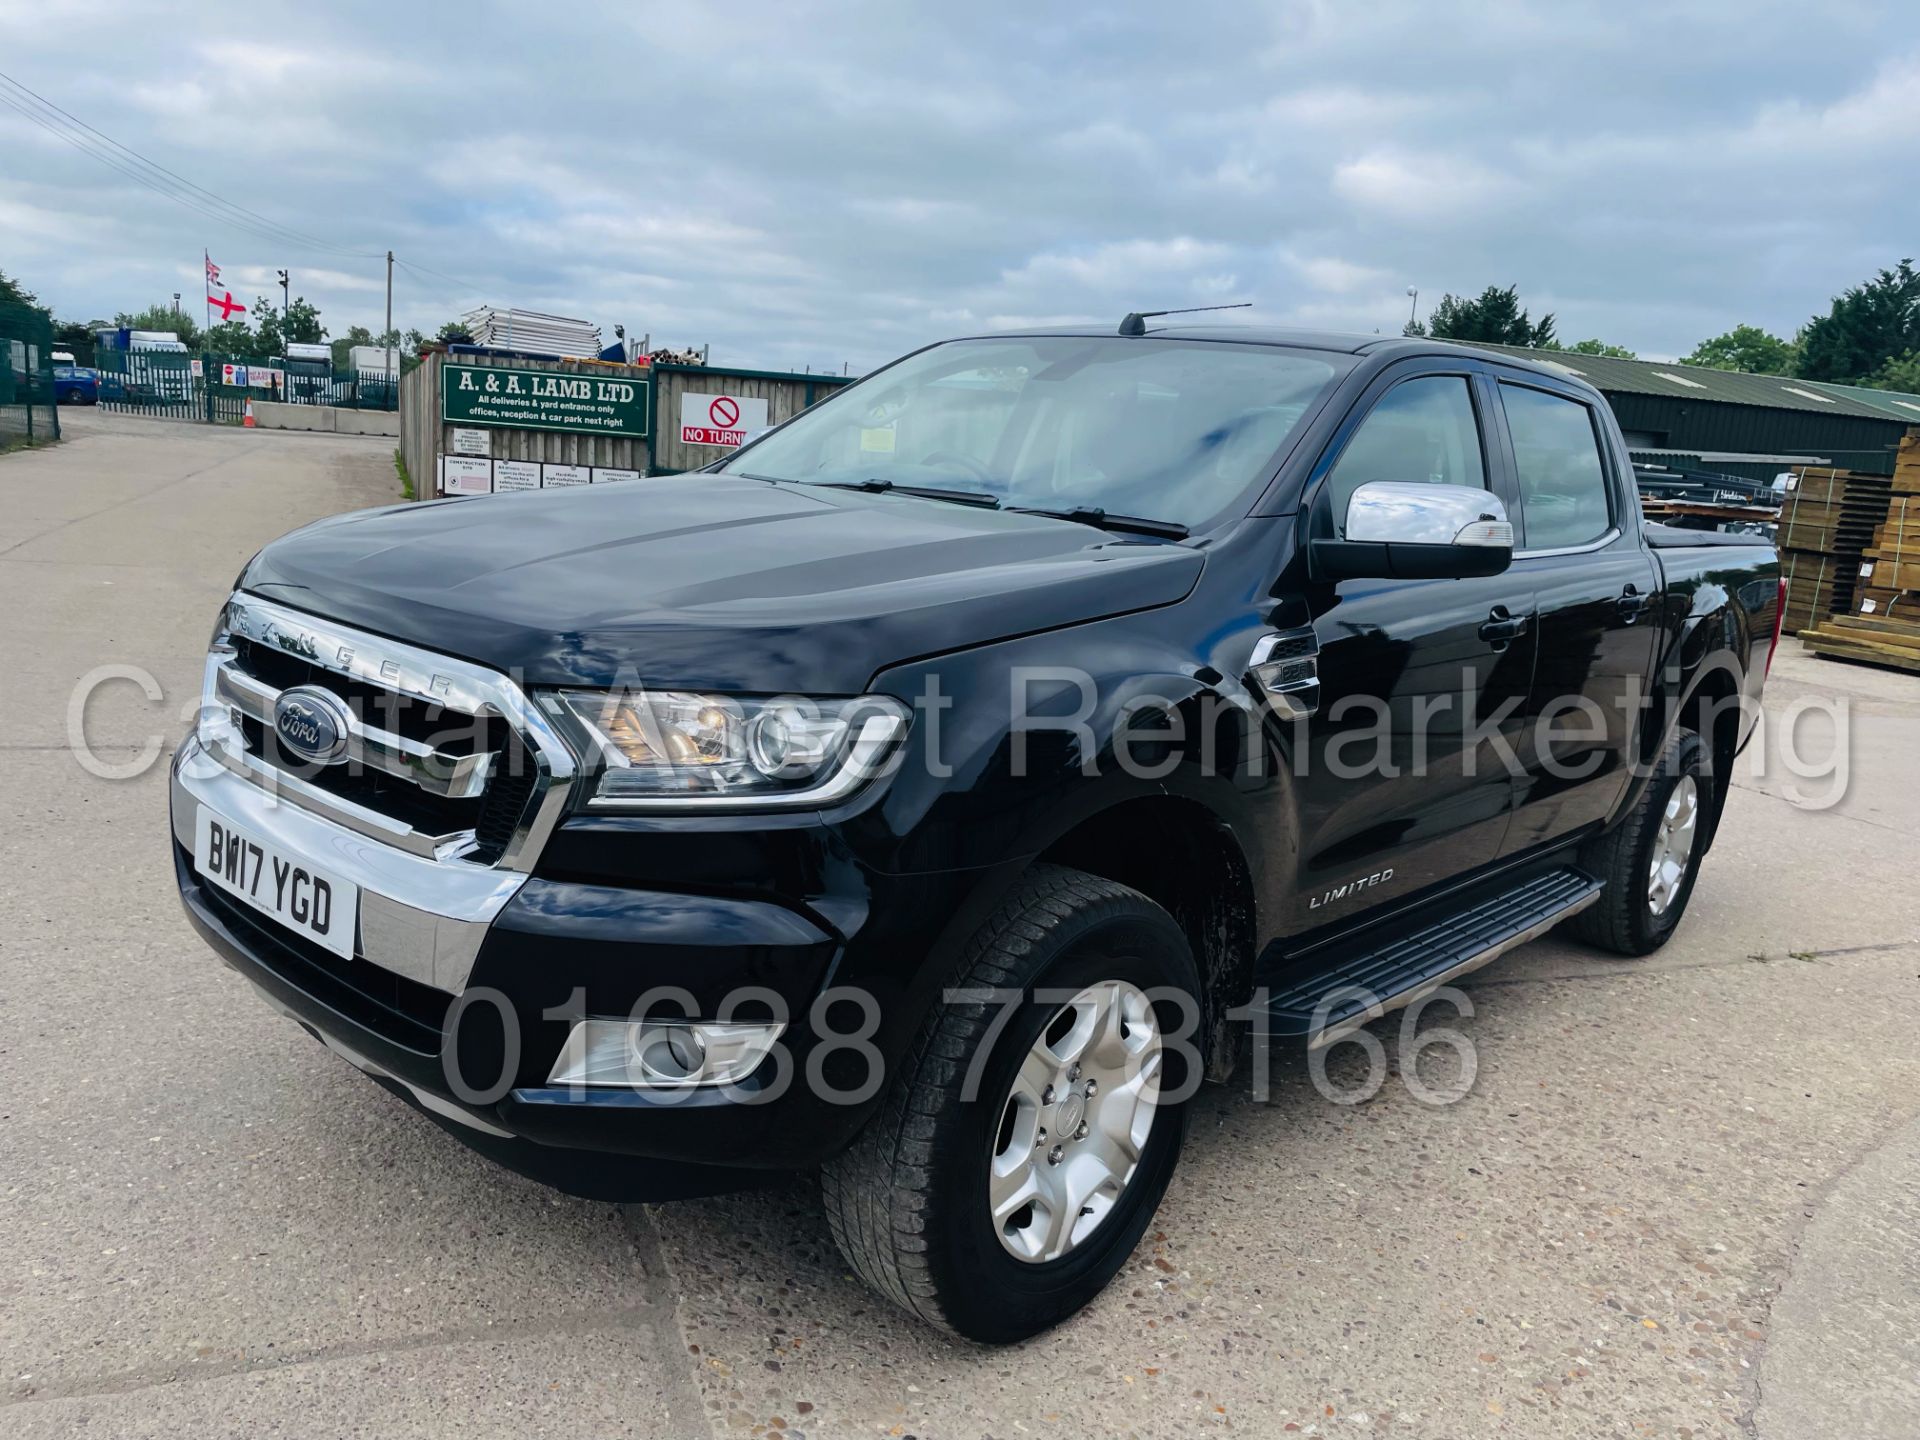 (On Sale) FORD RANGER *LIMITED EDITION* DOUBLE CAB PICK-UP (2017 -EURO 6) 'AUTO - LEATHER' (1 OWNER) - Image 5 of 56